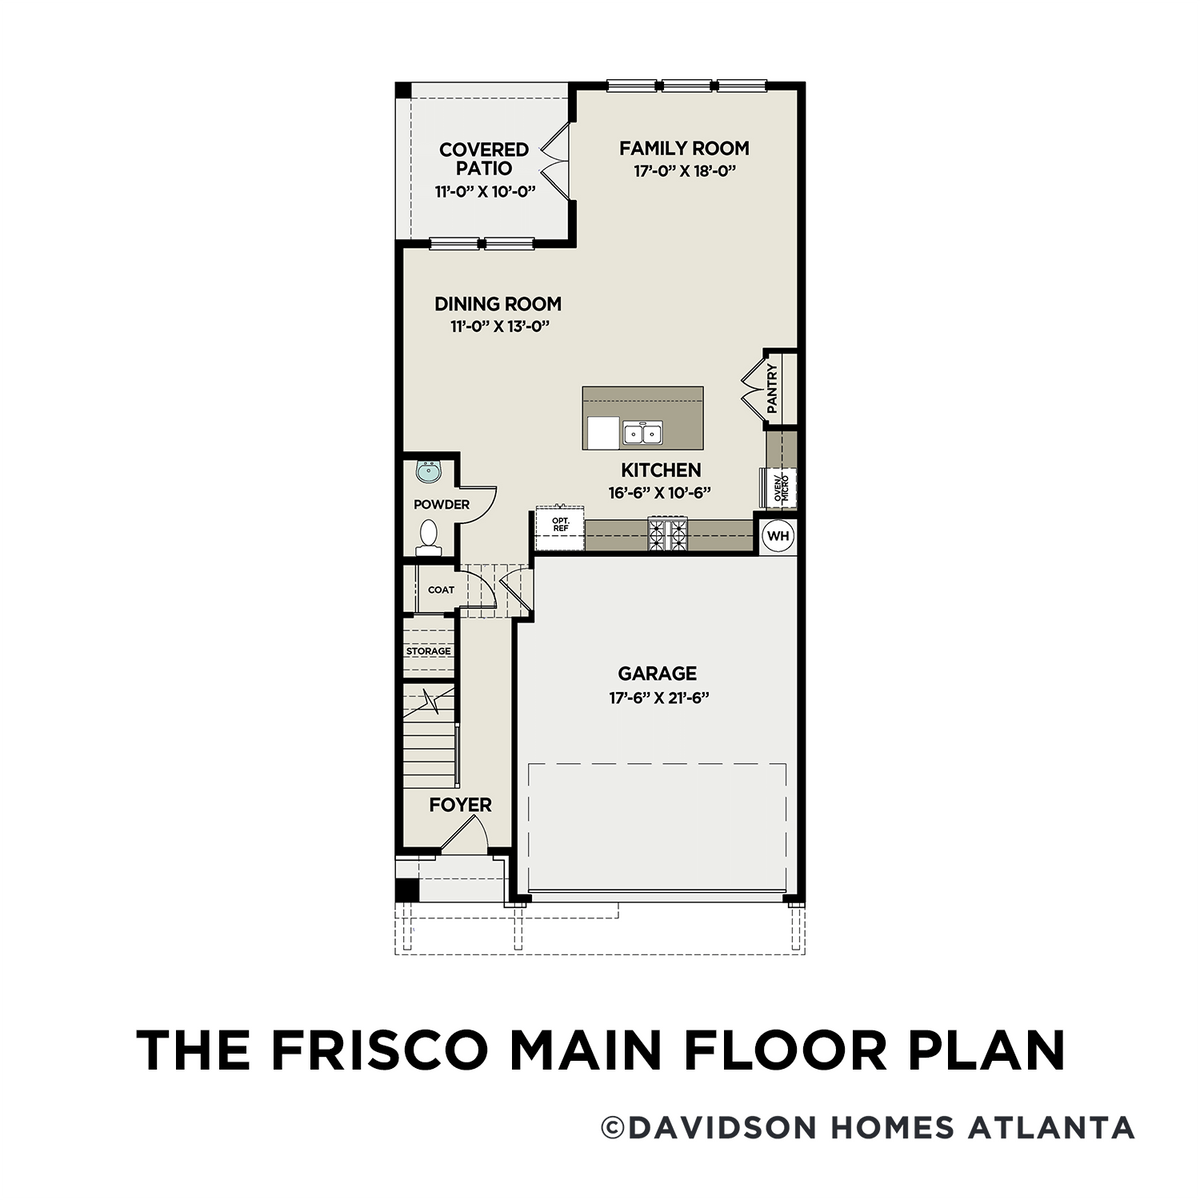 1 - The Frisco A floor plan layout for 687 Stickley Oak Way in Davidson Homes' The Village at Towne Lake community.